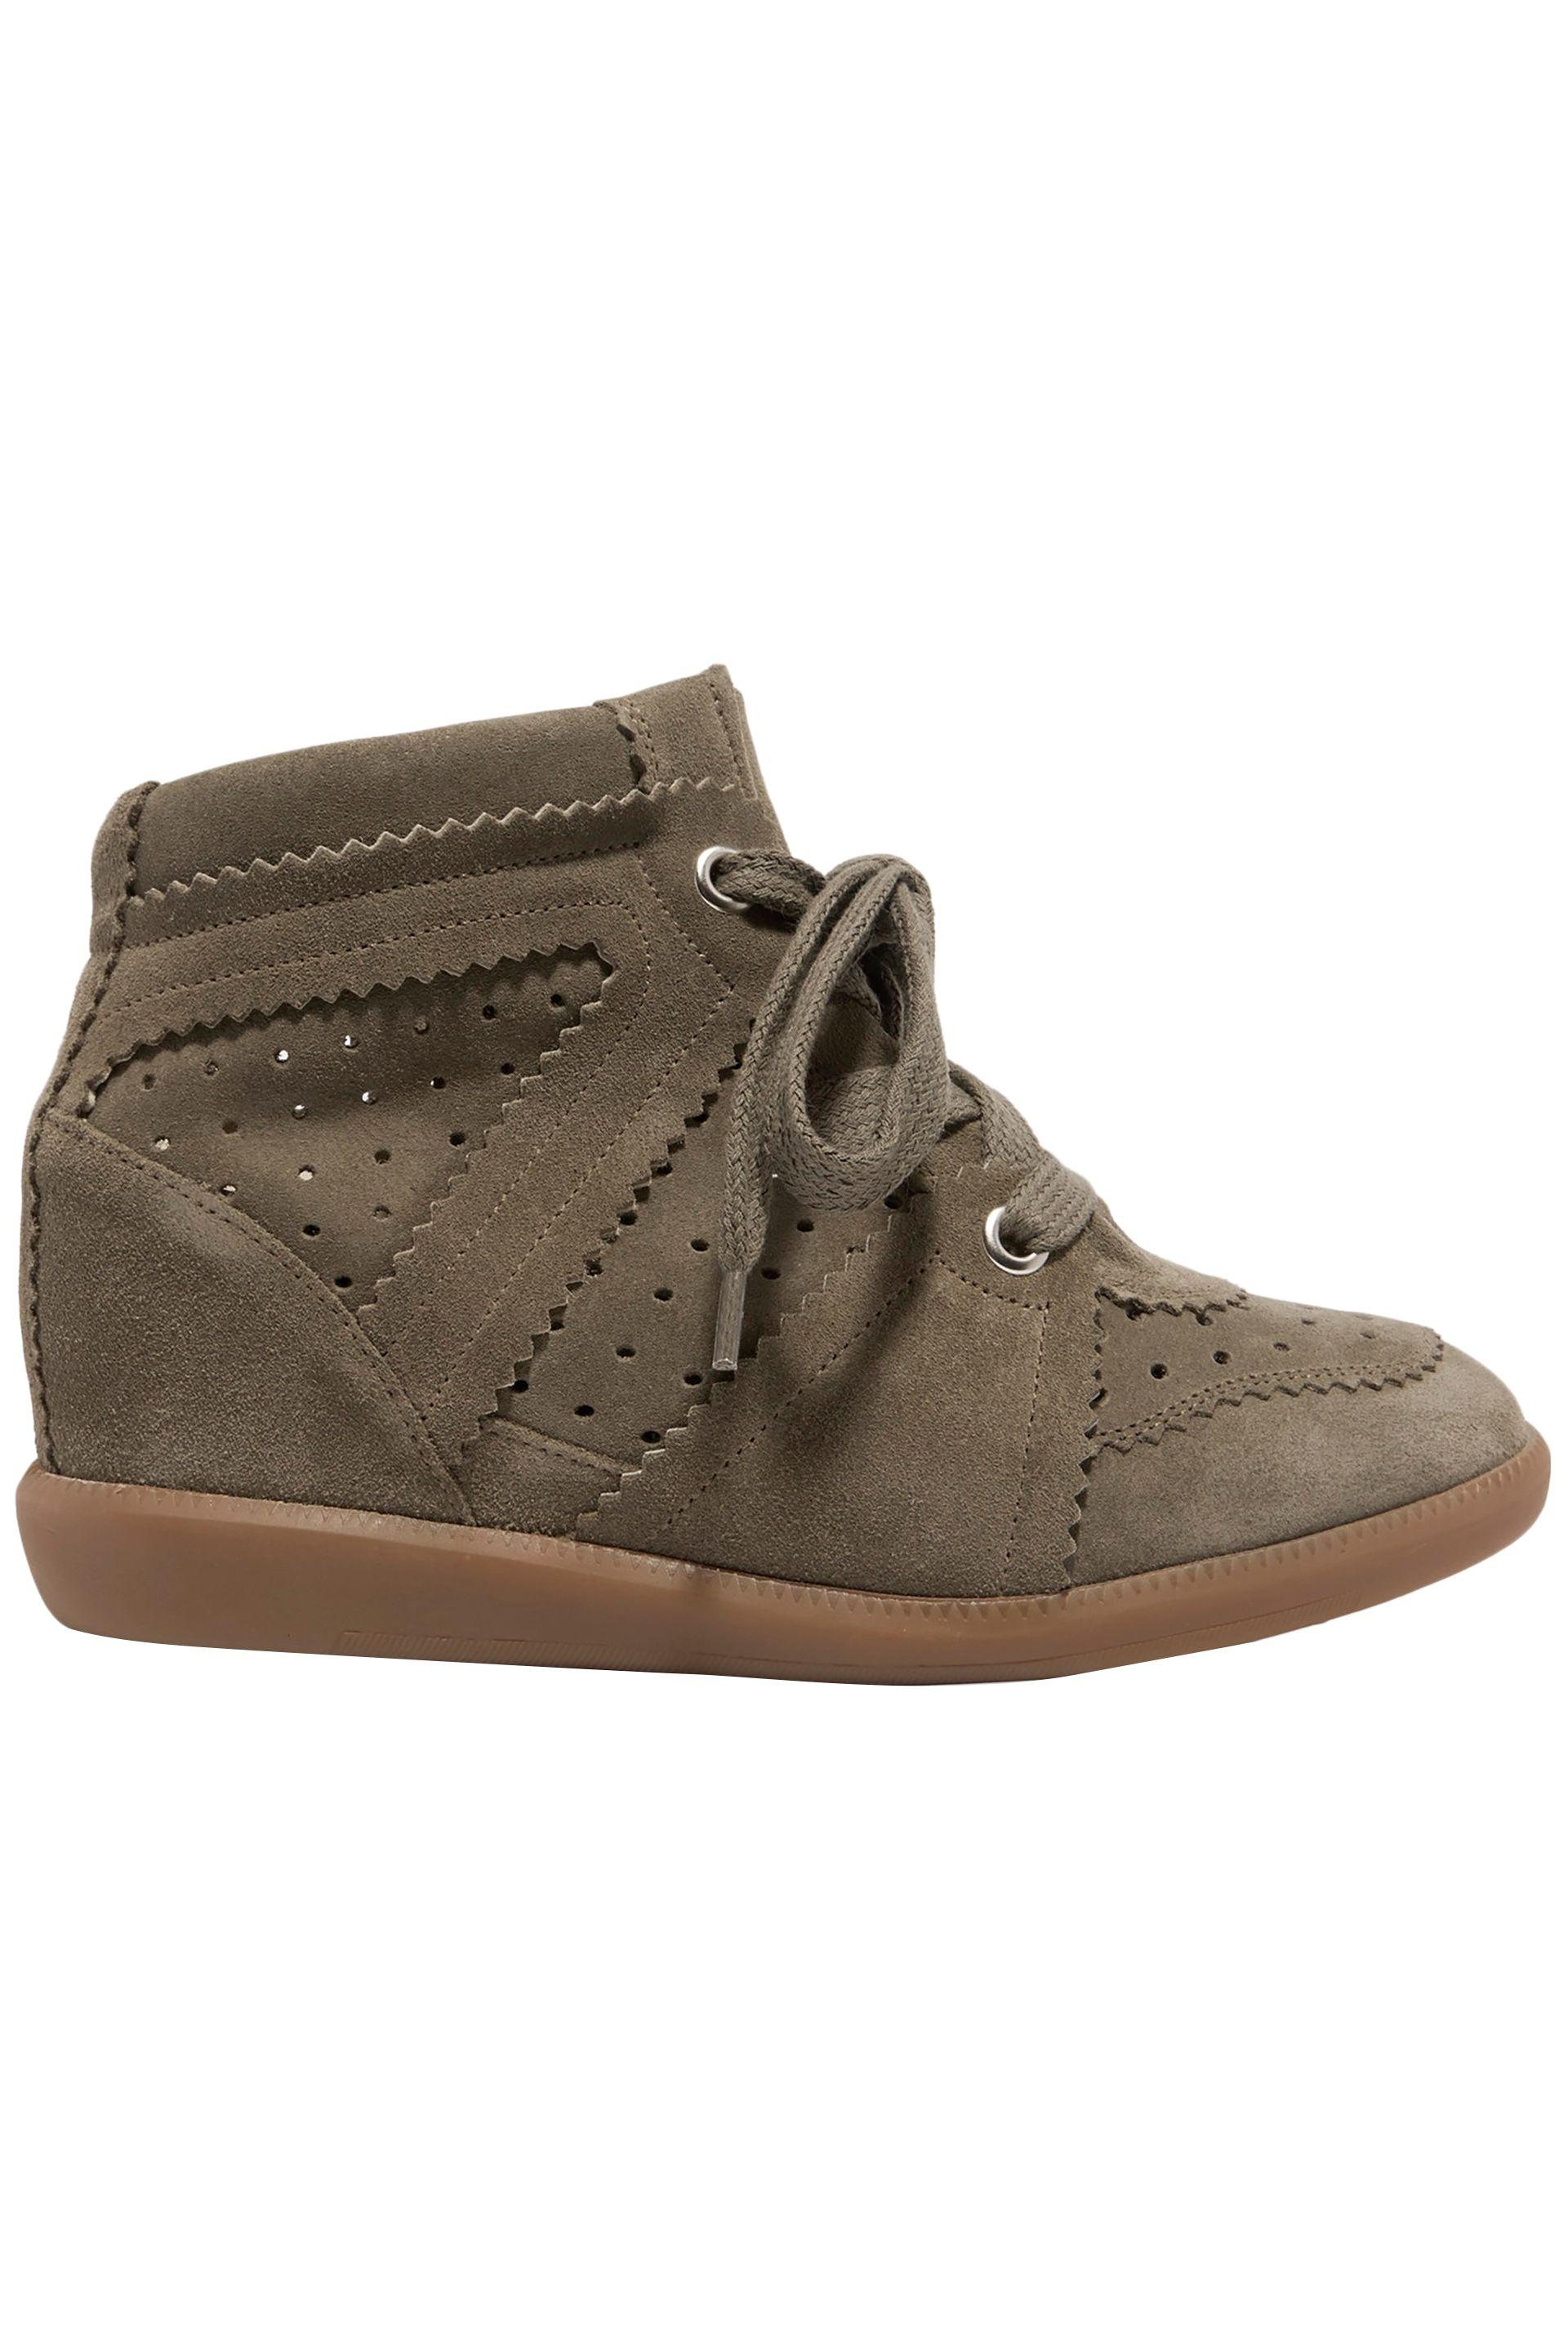 lovgivning titel Mundskyl Isabel Marant Étoile Bobby Perforated Suede Wedge Sneakers Army Green - Lyst